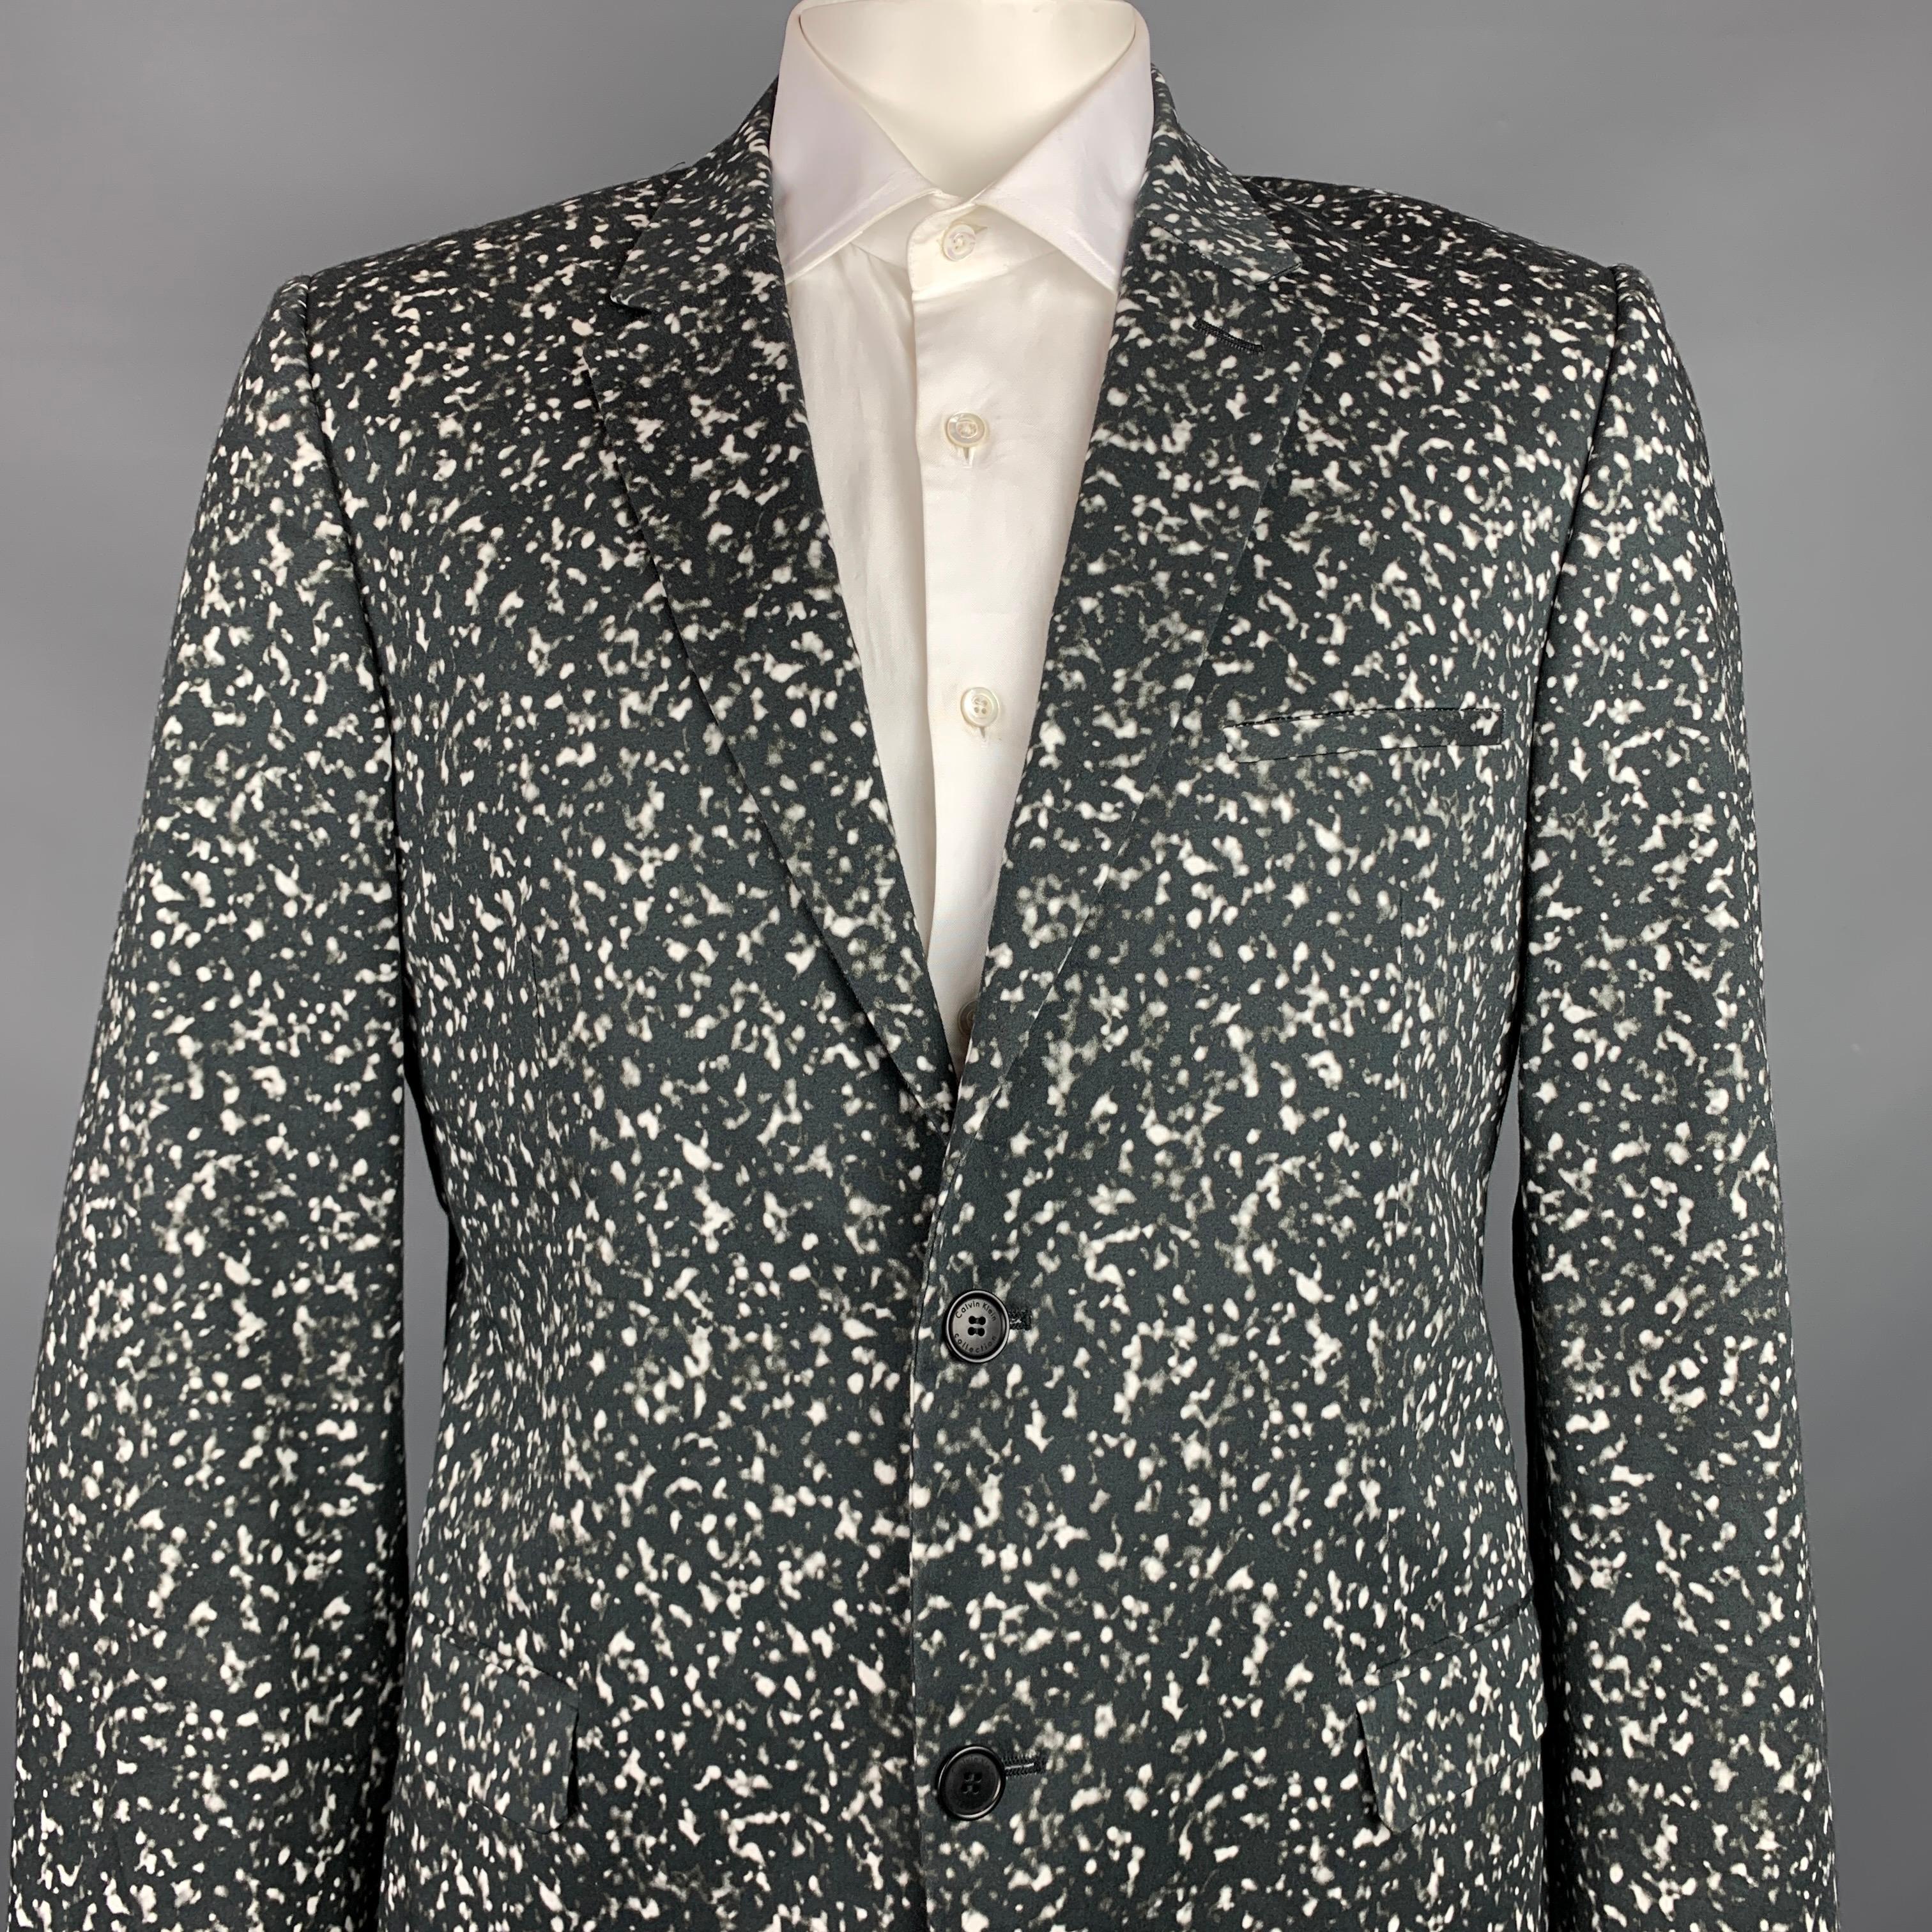 CALVIN KLEIN COLLECTION sport coat comes in a black & white print cotton with a full liner featuring a notch lapel, flap pockets, and a single button closure. Made in USA.

Very Good Pre-Owned Condition.
Marked: 54/44

Measurements:

Shoulder: 19